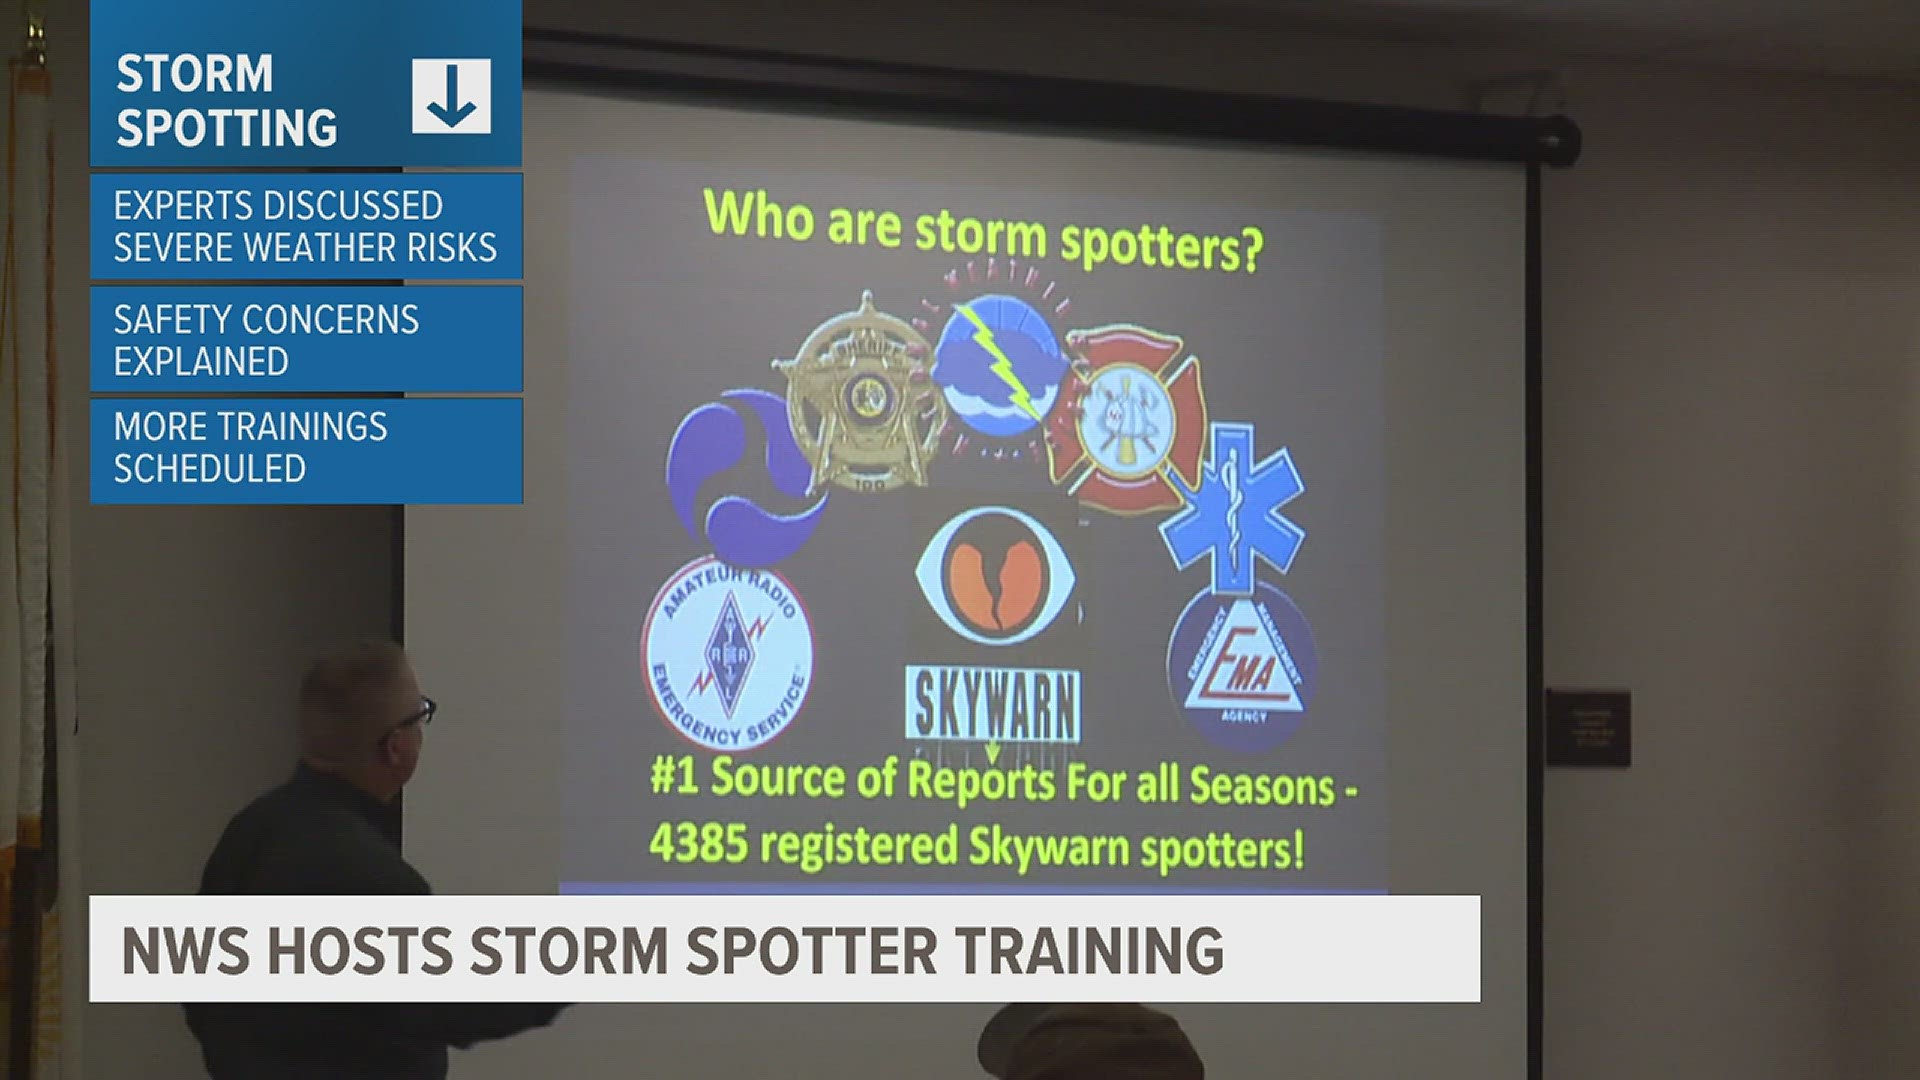 Meteorologists covered severe weather risks during thunderstorms and tornadoes.